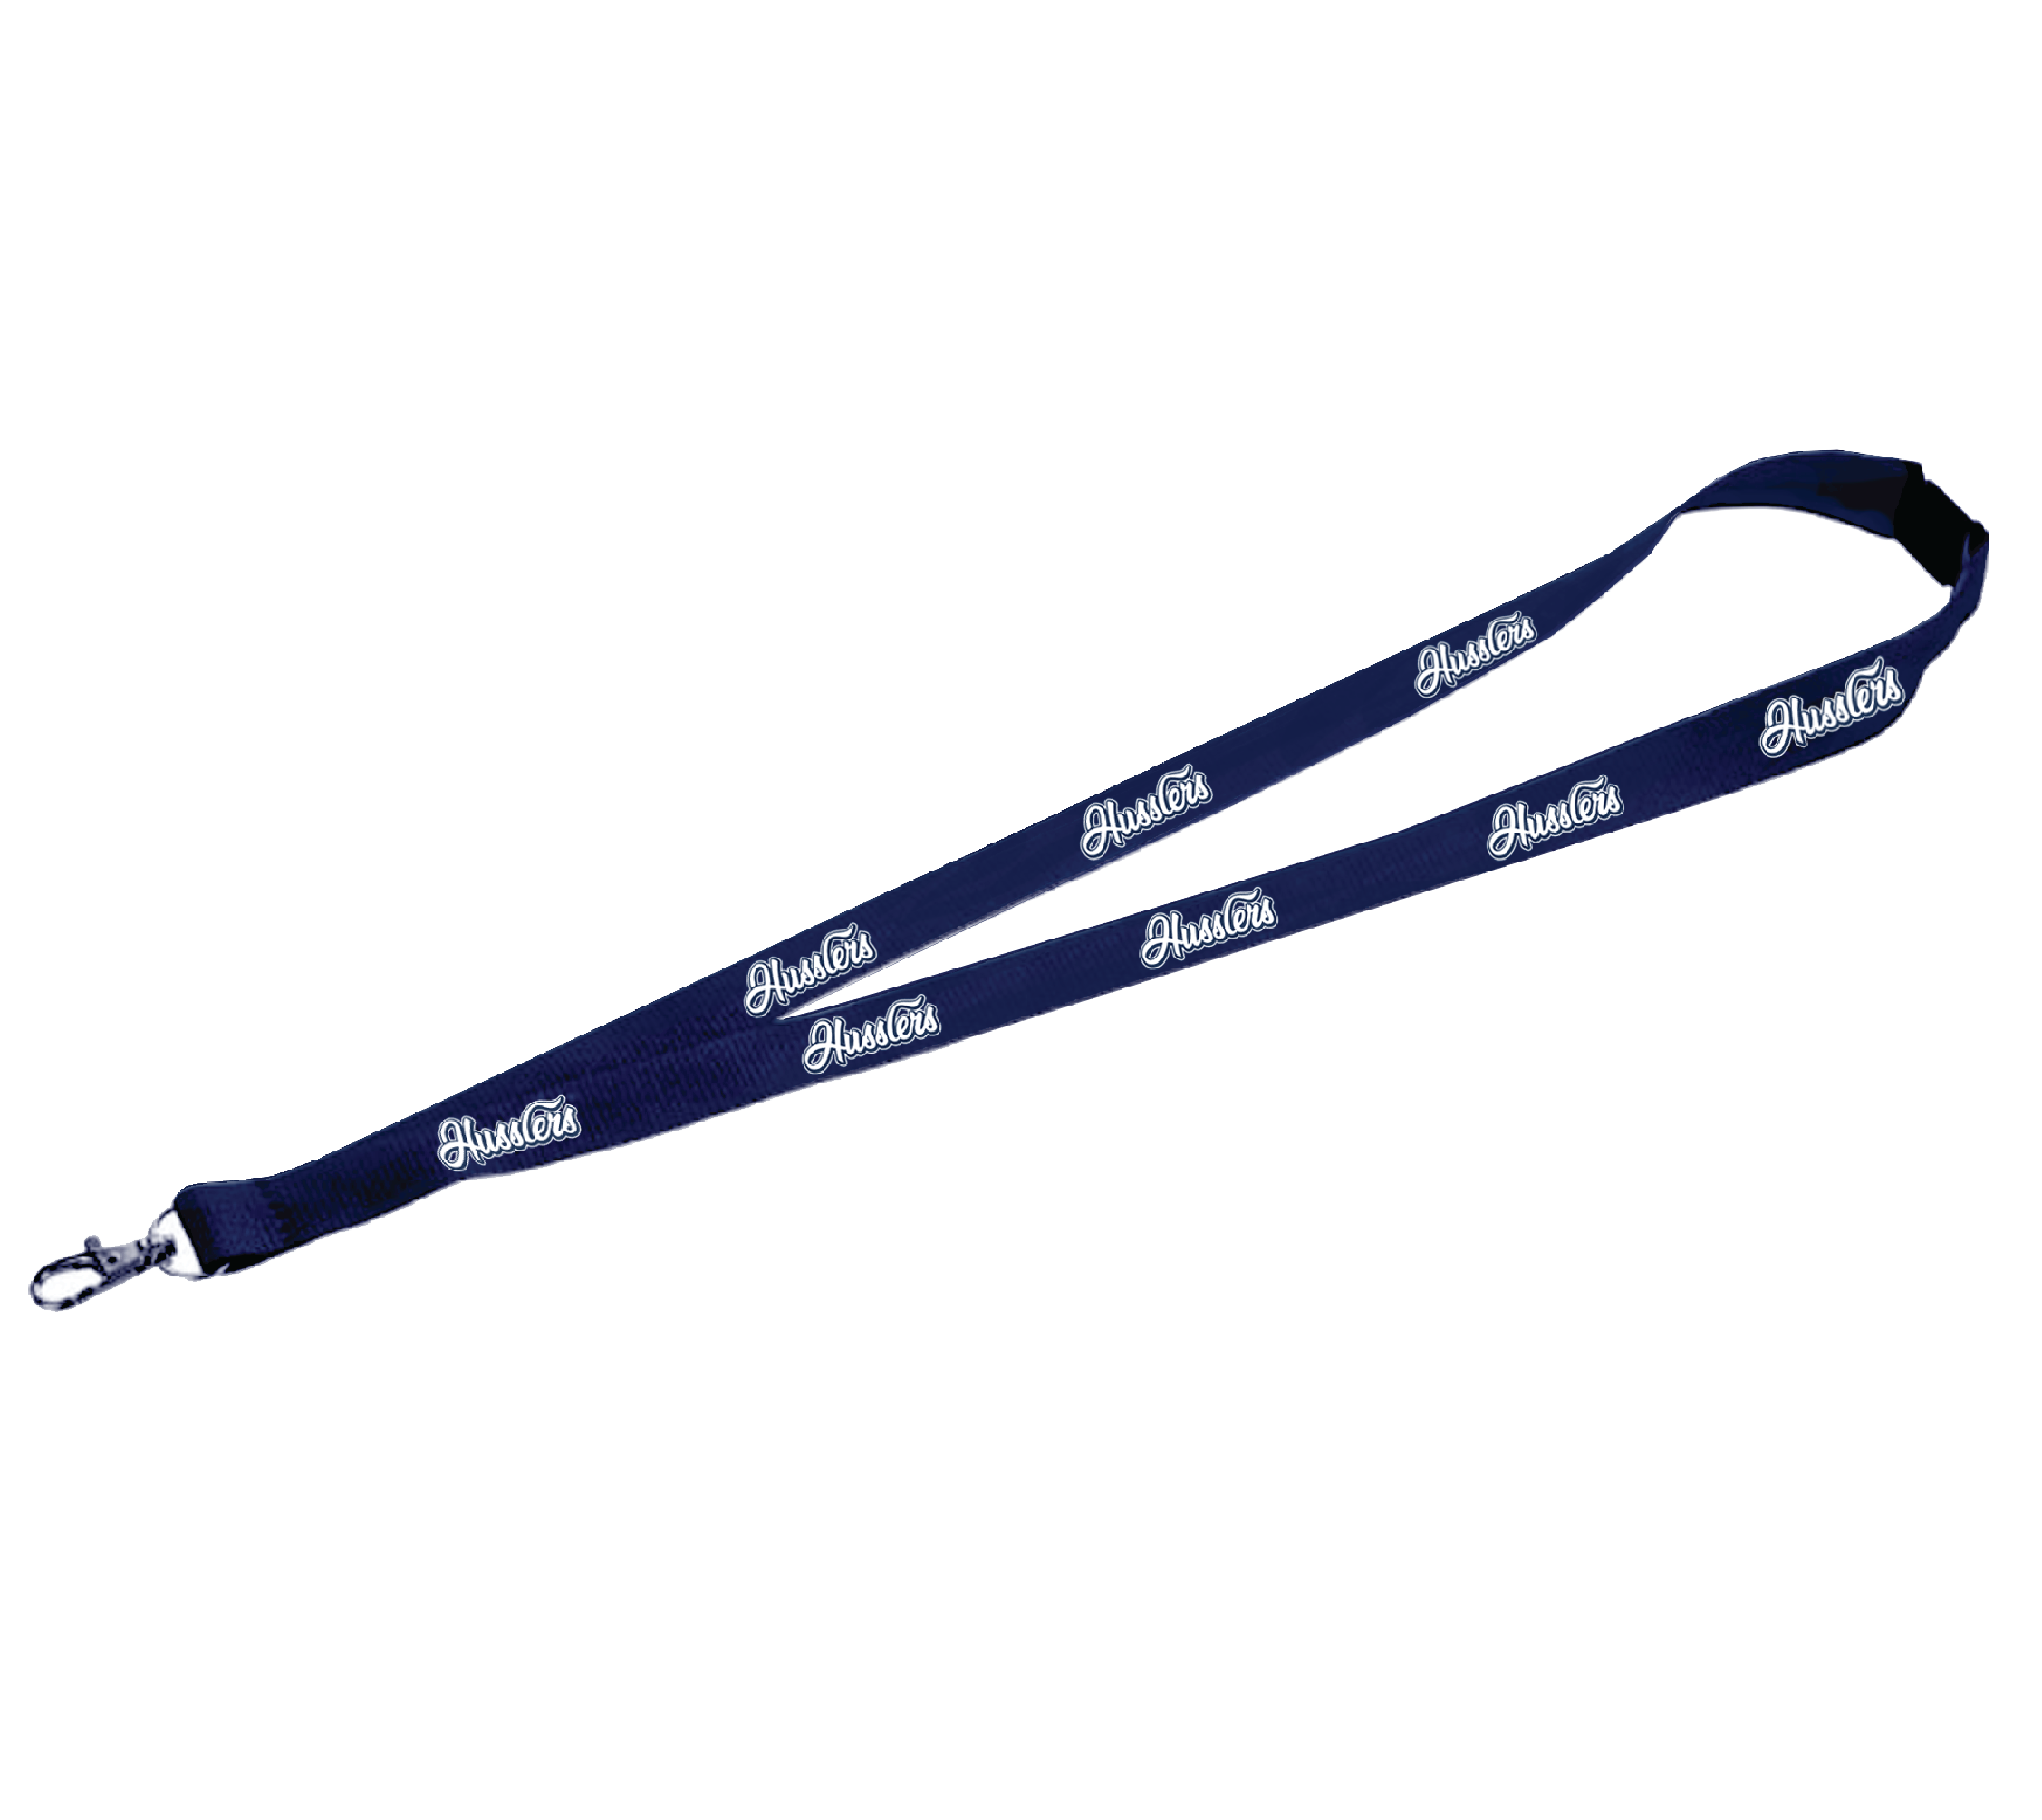 Polyester Lanyard, with Husslers Team branding